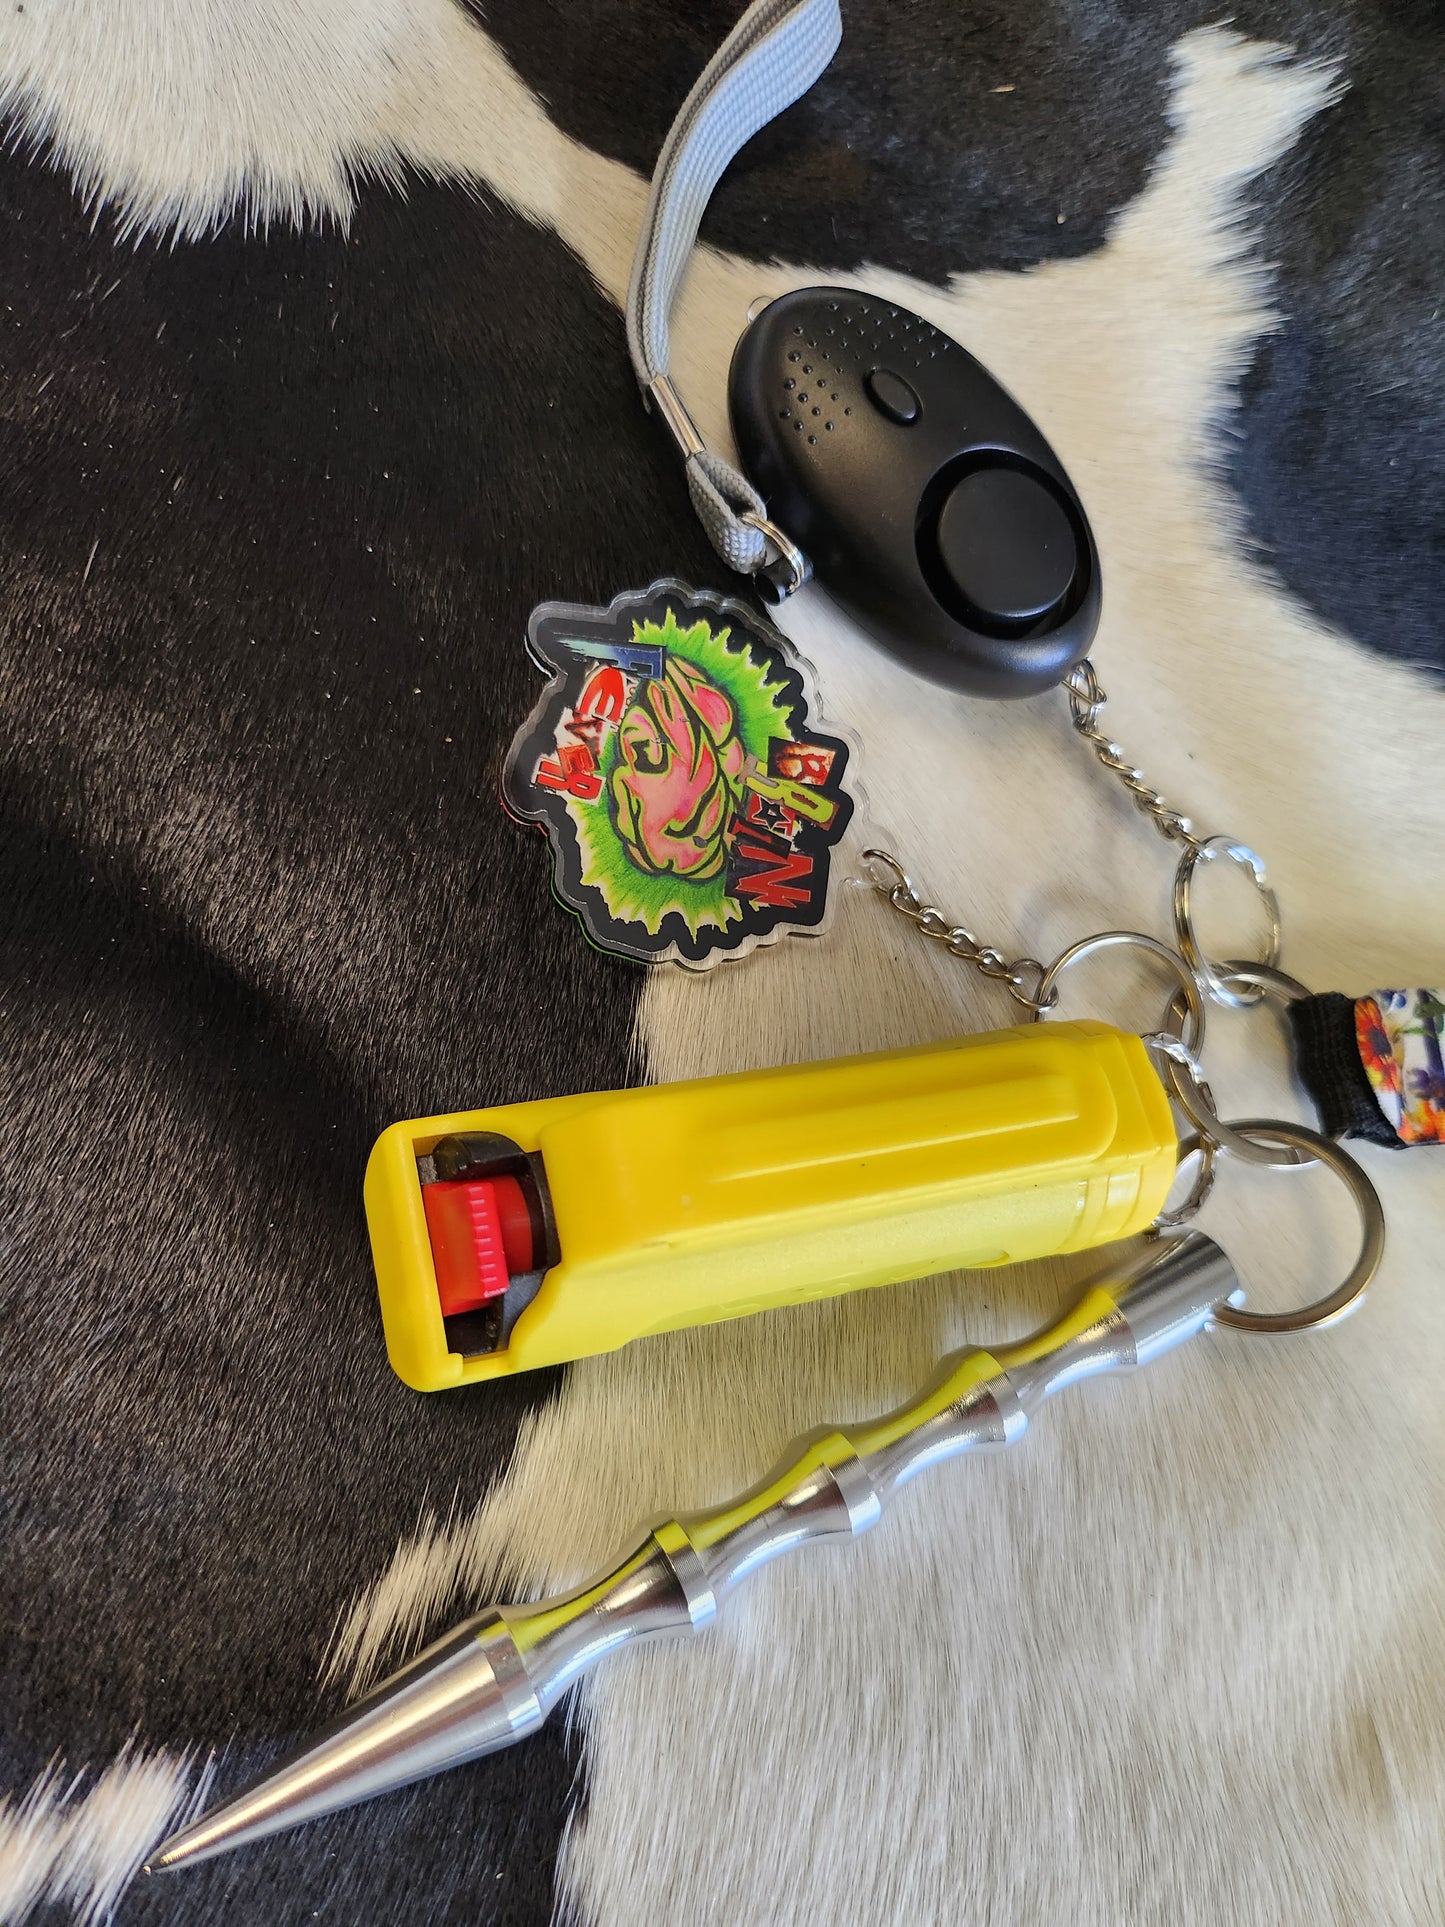 Self defense keychain with with sun flowers and yellowe pepper spray